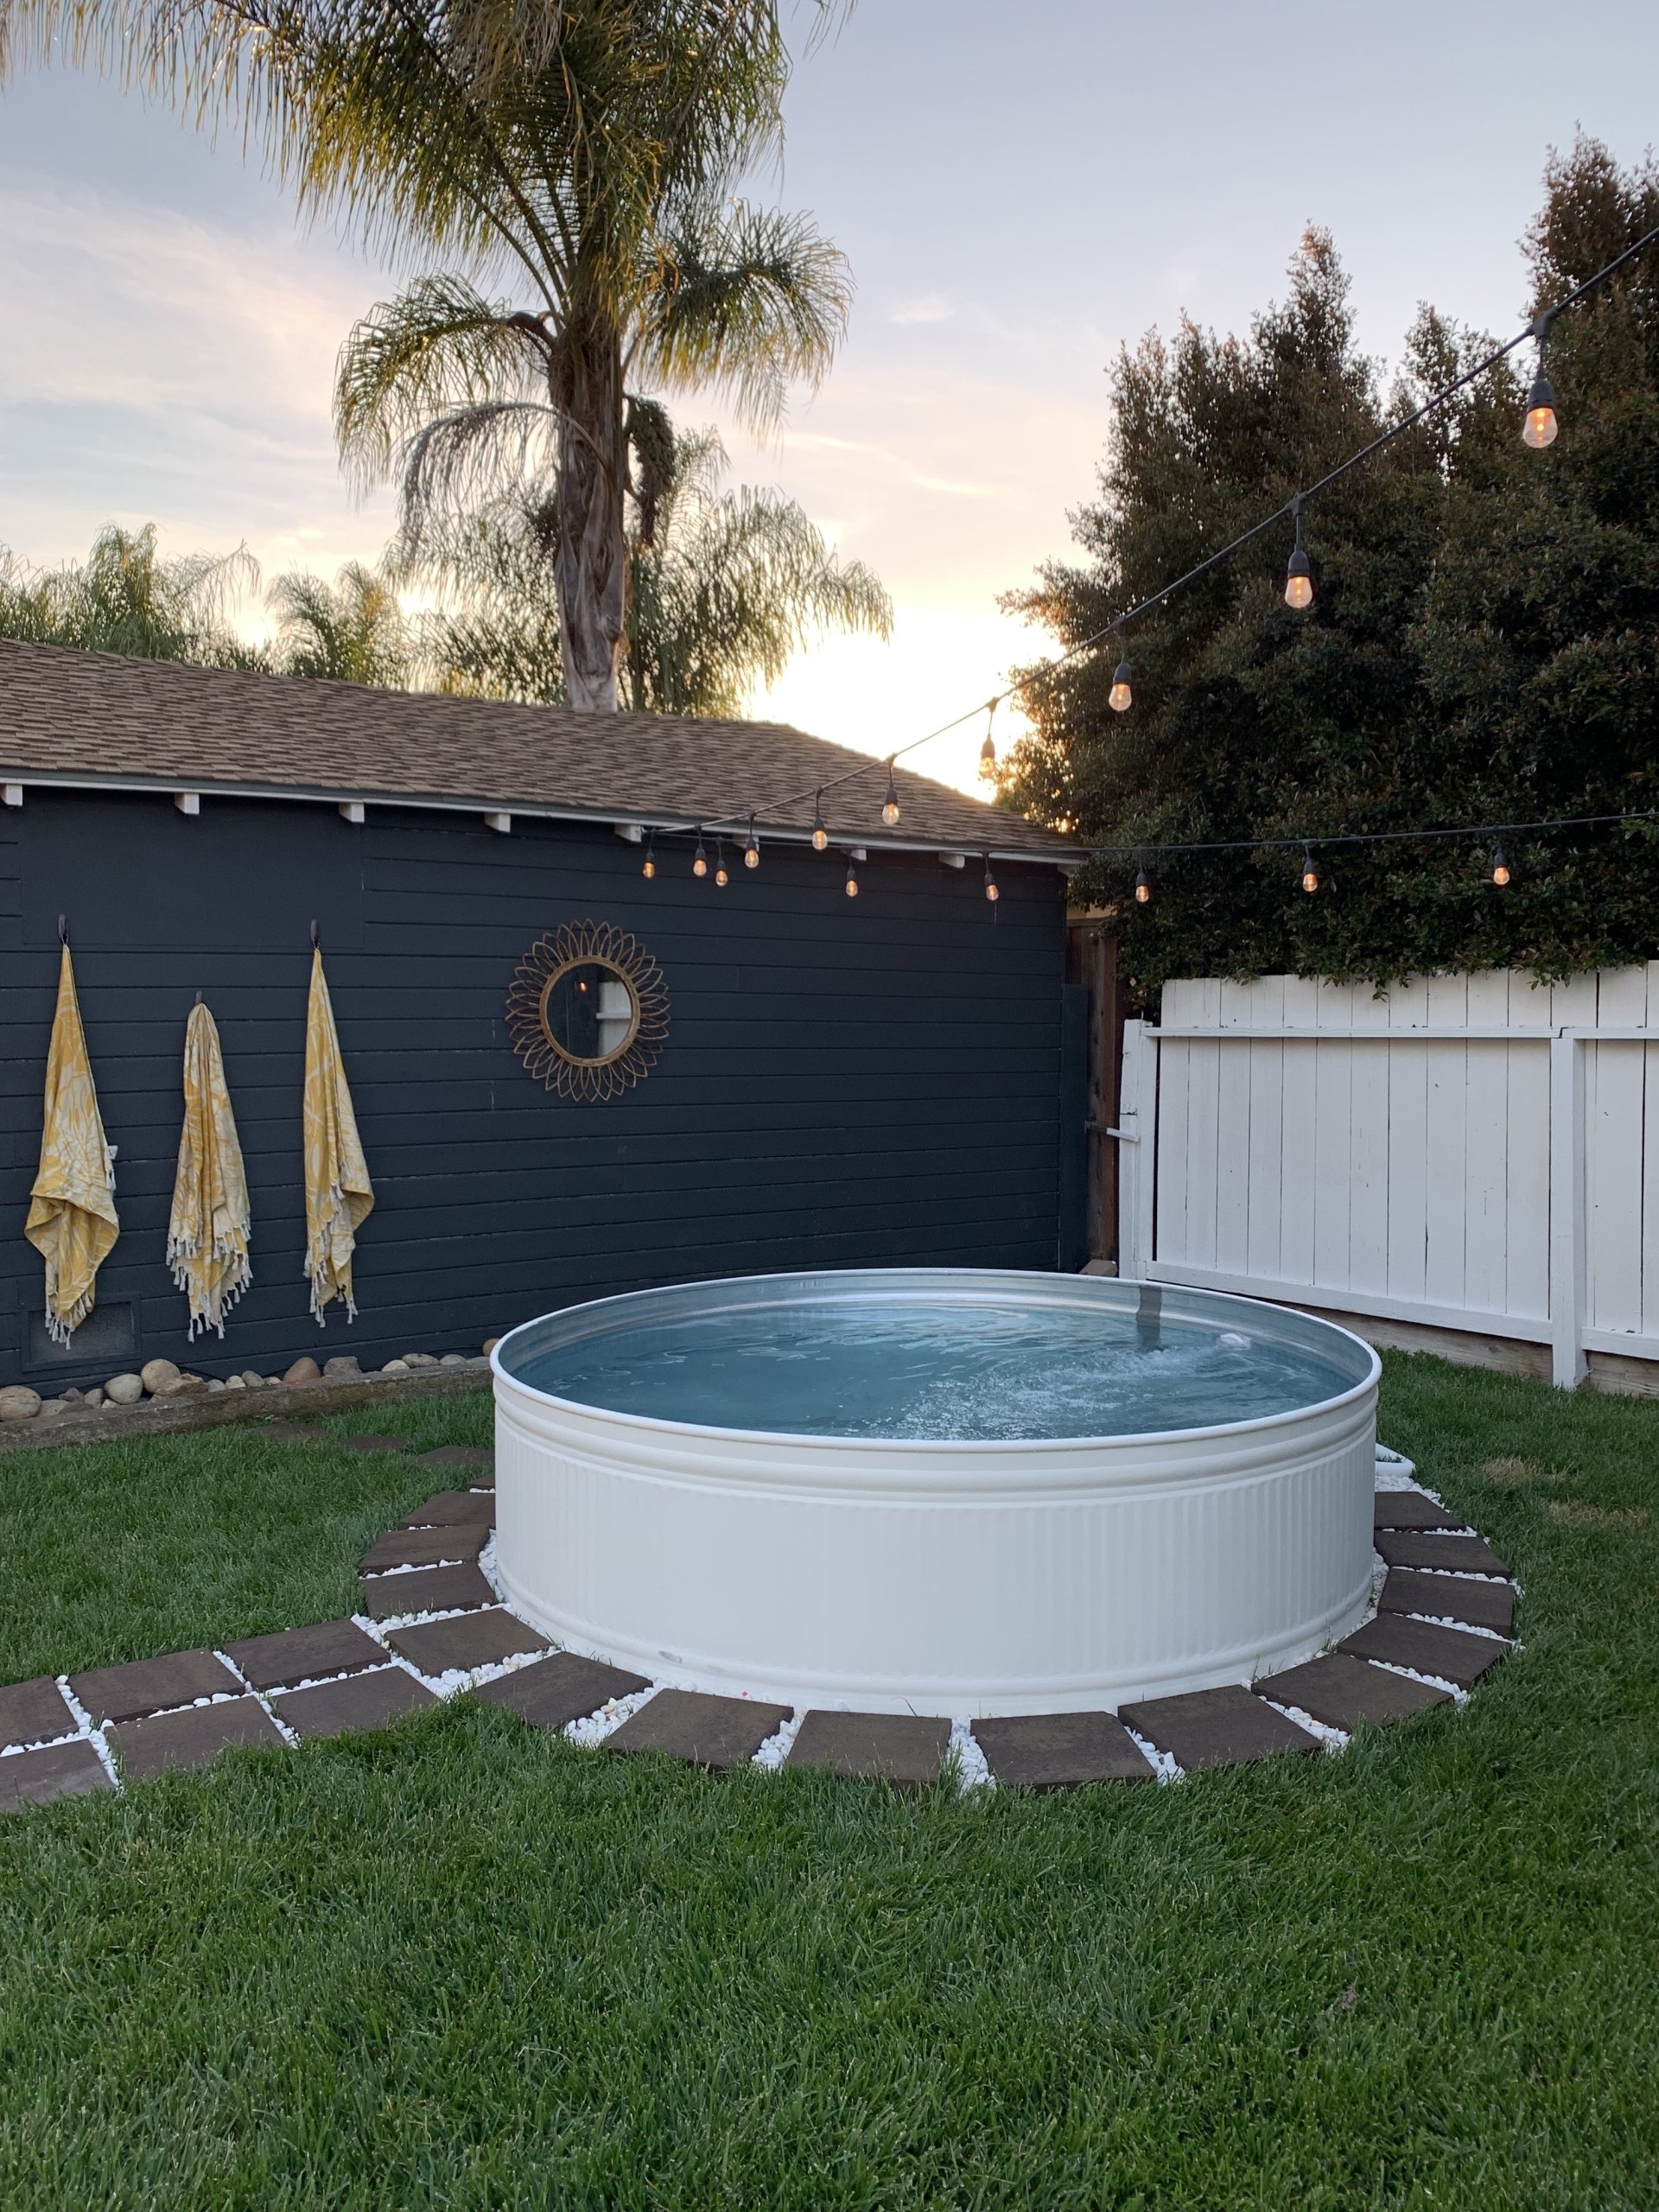 This diy stock tank pool painted white is the first one we saw. She painted it from galvanized metal to white with your everyday outdoor exterior paint. We love that it matches her cute home perfectly! And can we talk about the rocks and stone around the pool? Really dresses it up! #stocktankpooldiy #diypool #diystocktankpool #outdoorpool #diyswimmingpool #outdoordecor